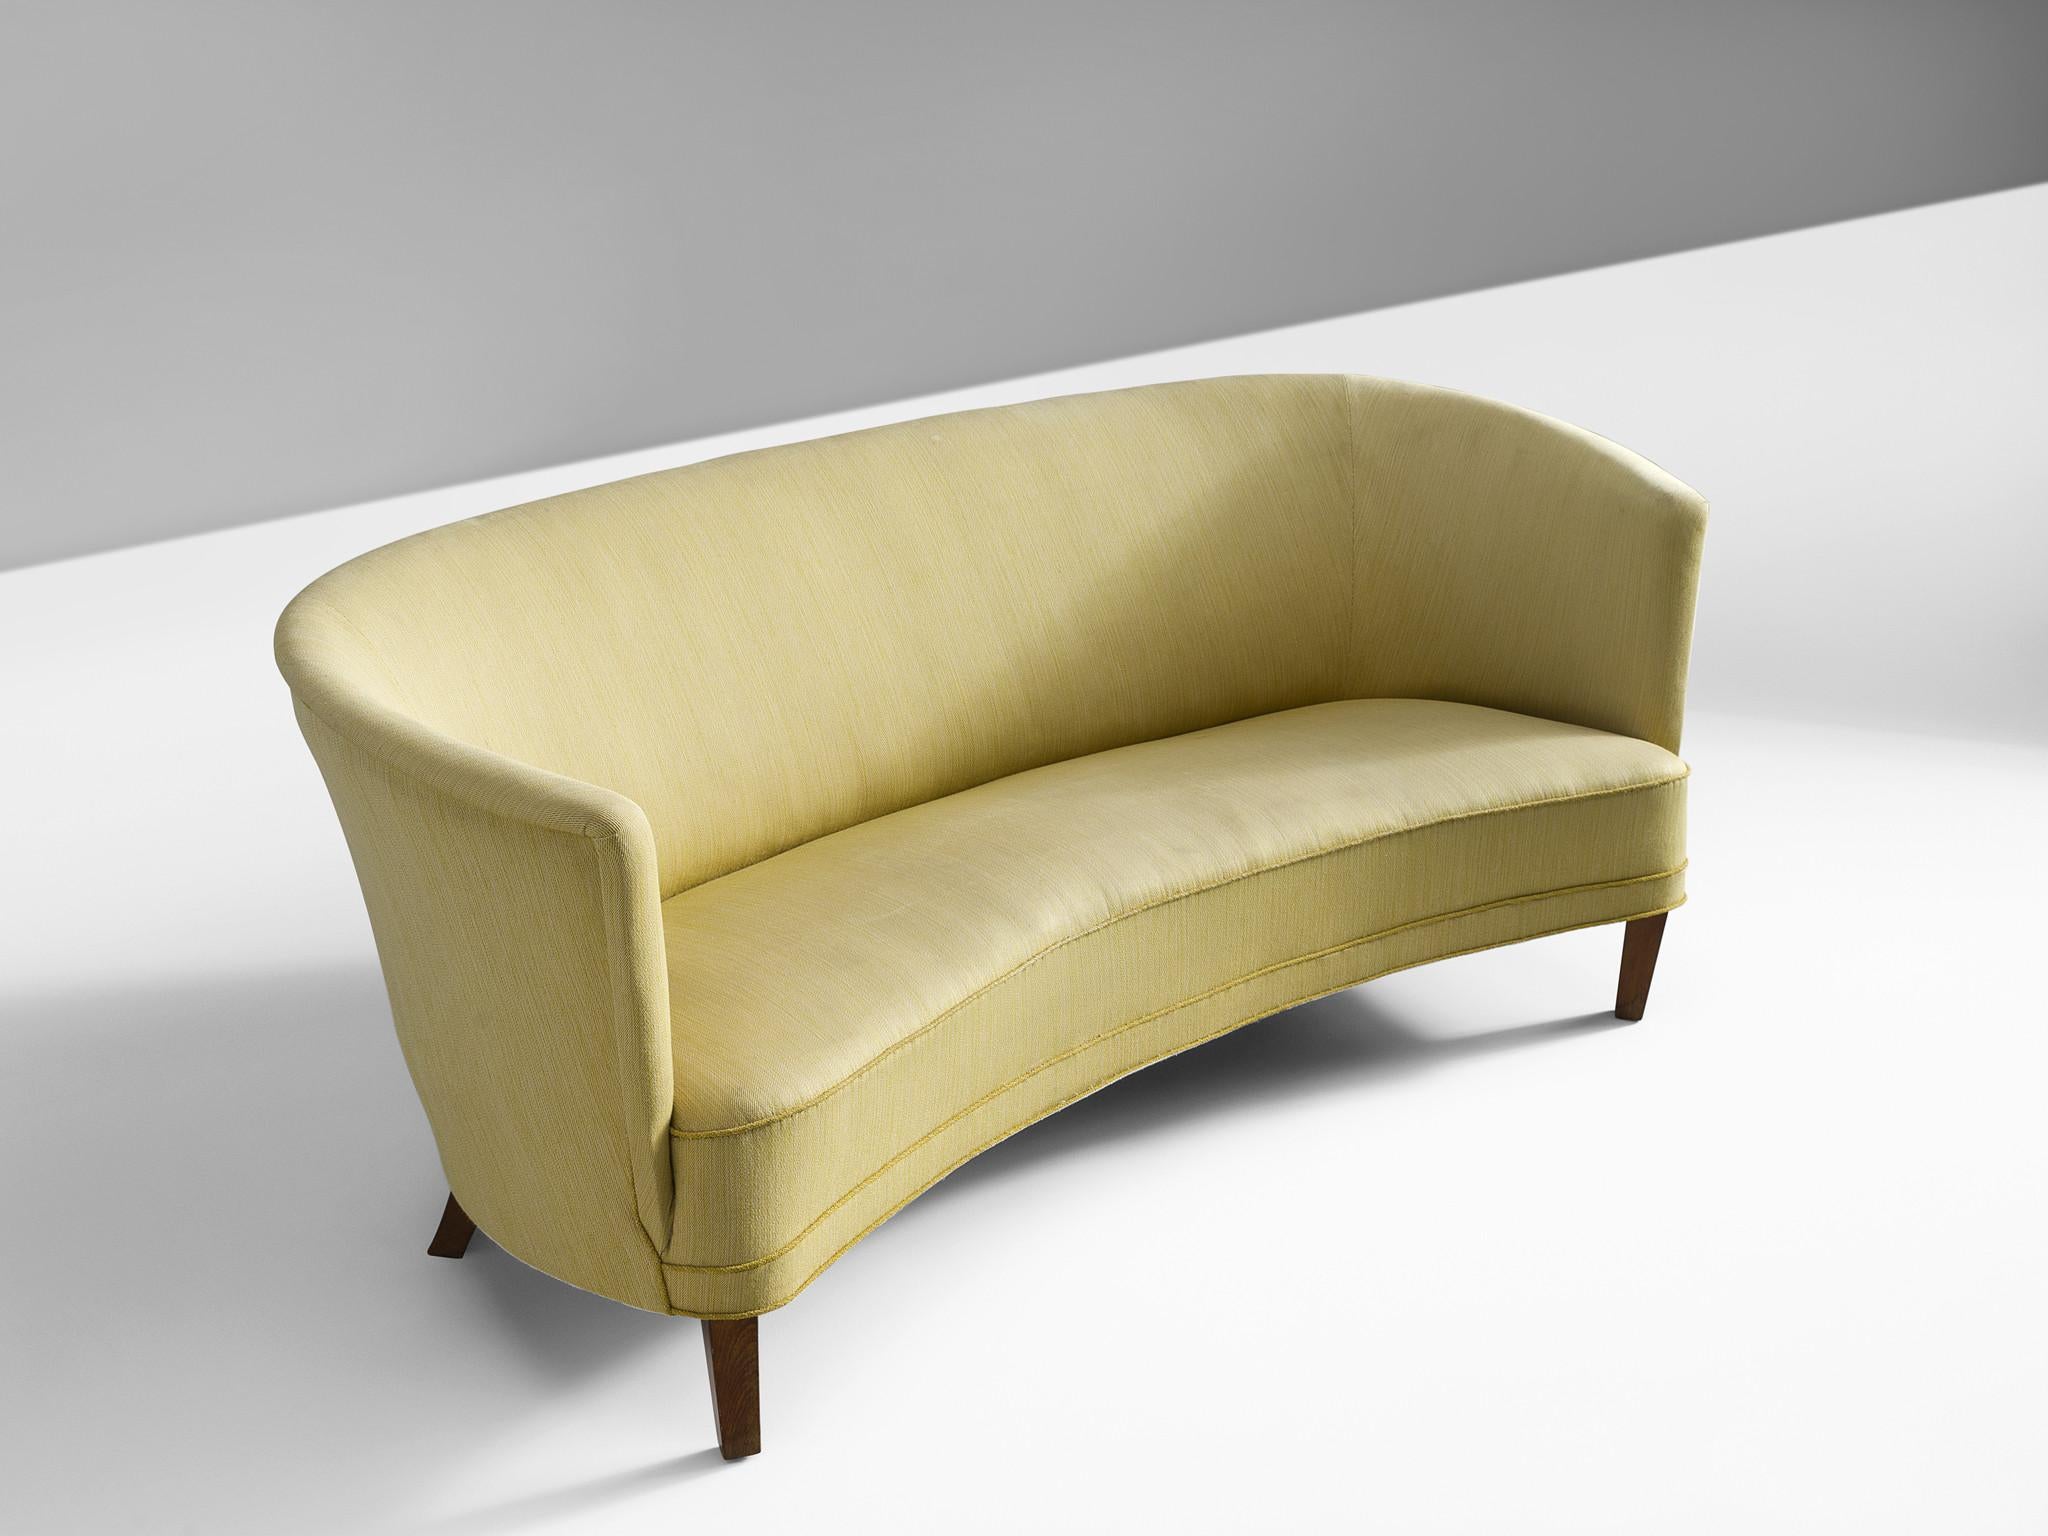 Sofa, fabric and wood, Denmark, 1950s.

Simplistic Danish sofa with clean lines and a high back. The sofa features small tapered wooden legs. The seat is thick and comfortable and is finished with piping. The high back embraces the sitter in